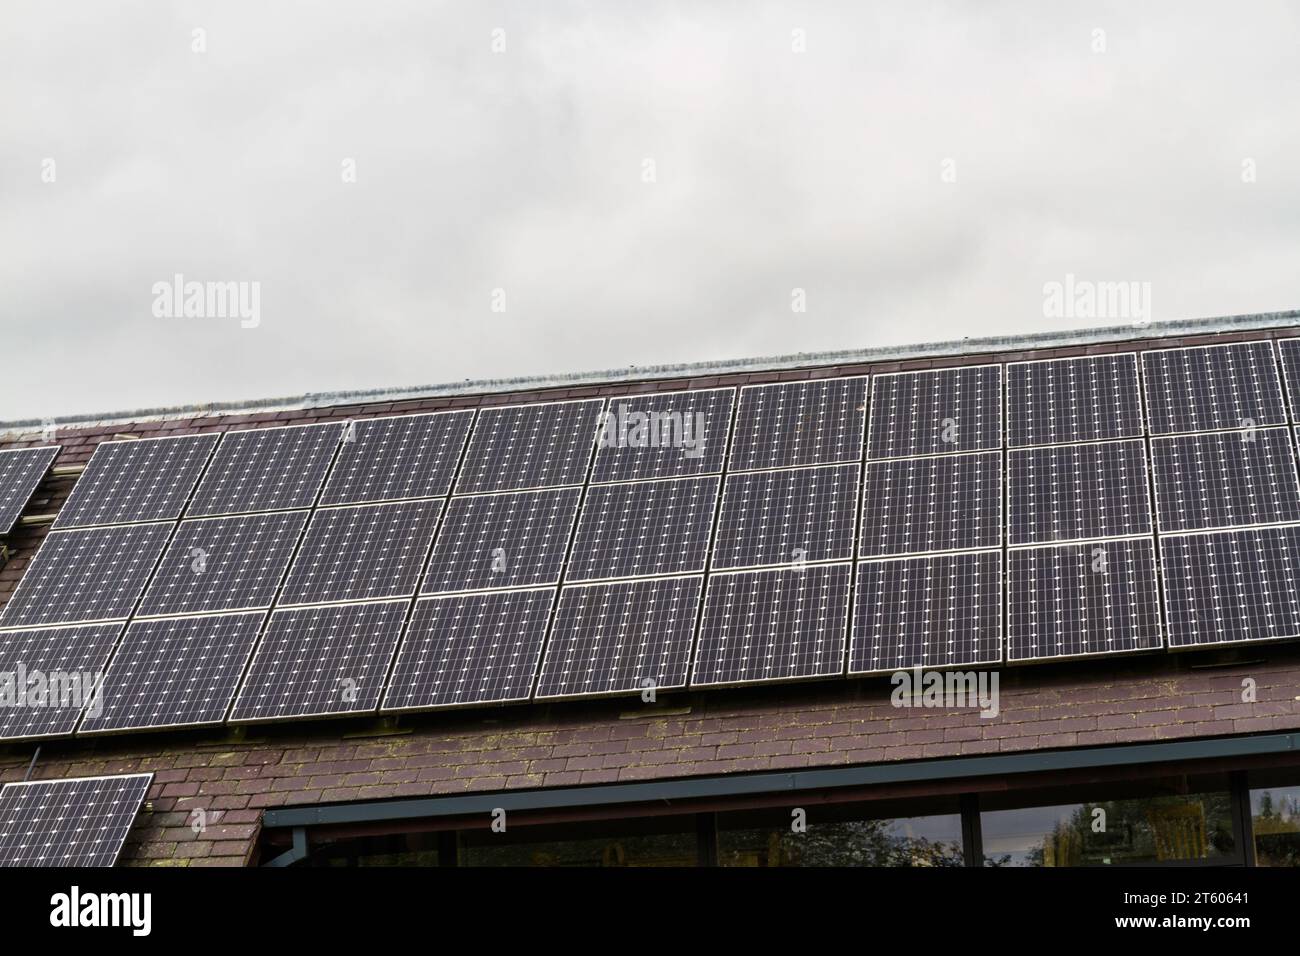 Three rows of solar panels mounted on a roof. Stock Photo